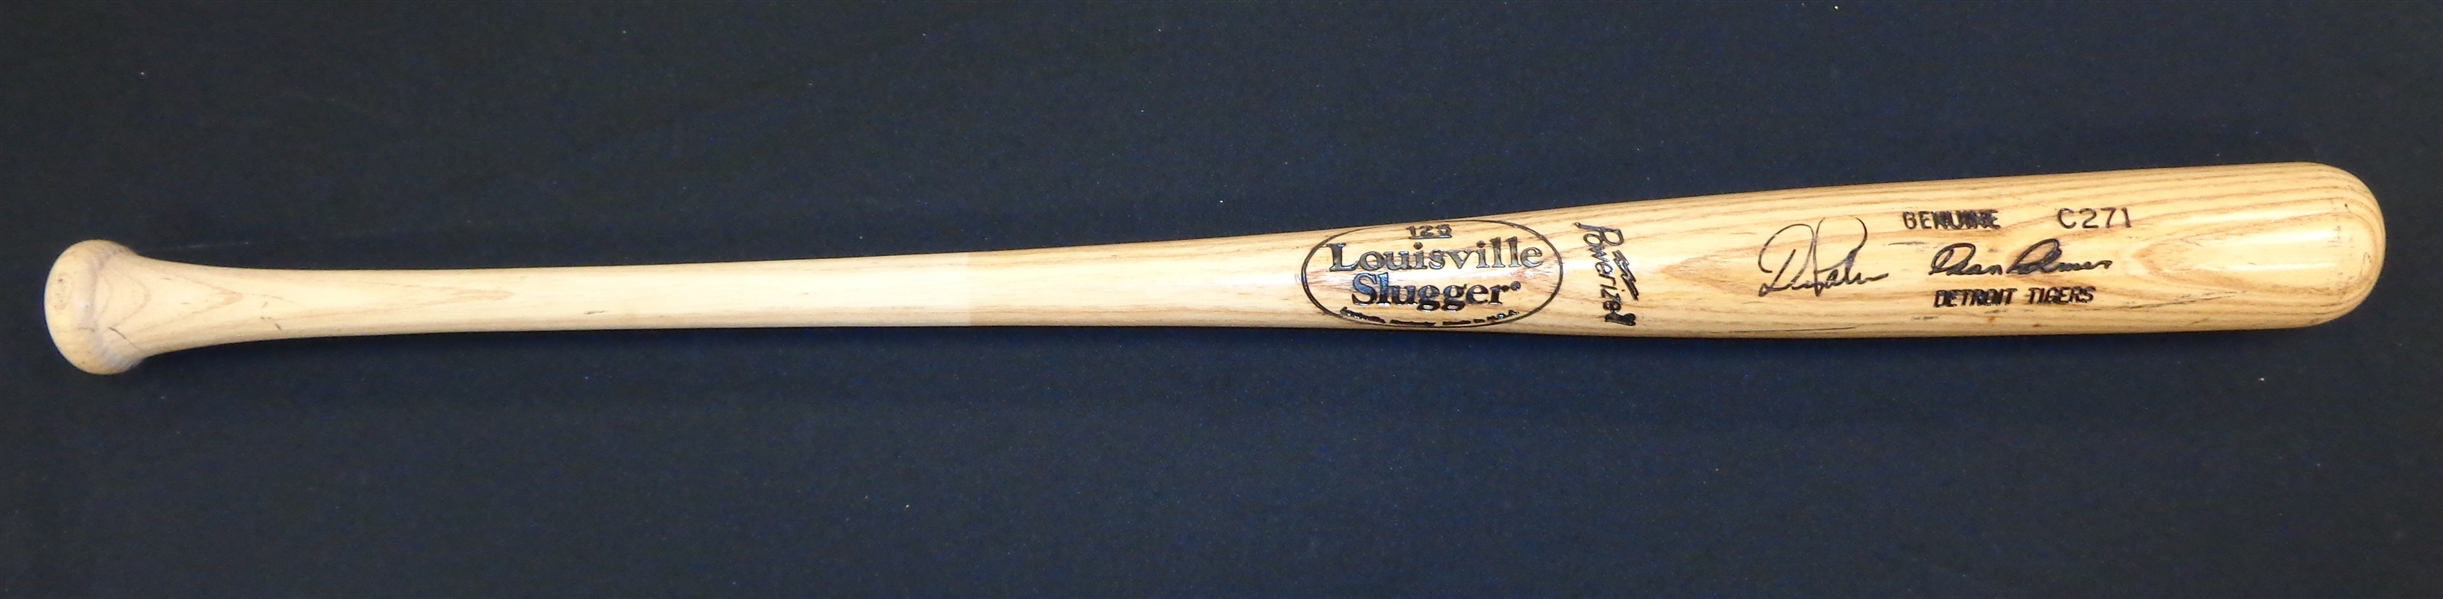 Dean Palmer Autographed Game Used Bat